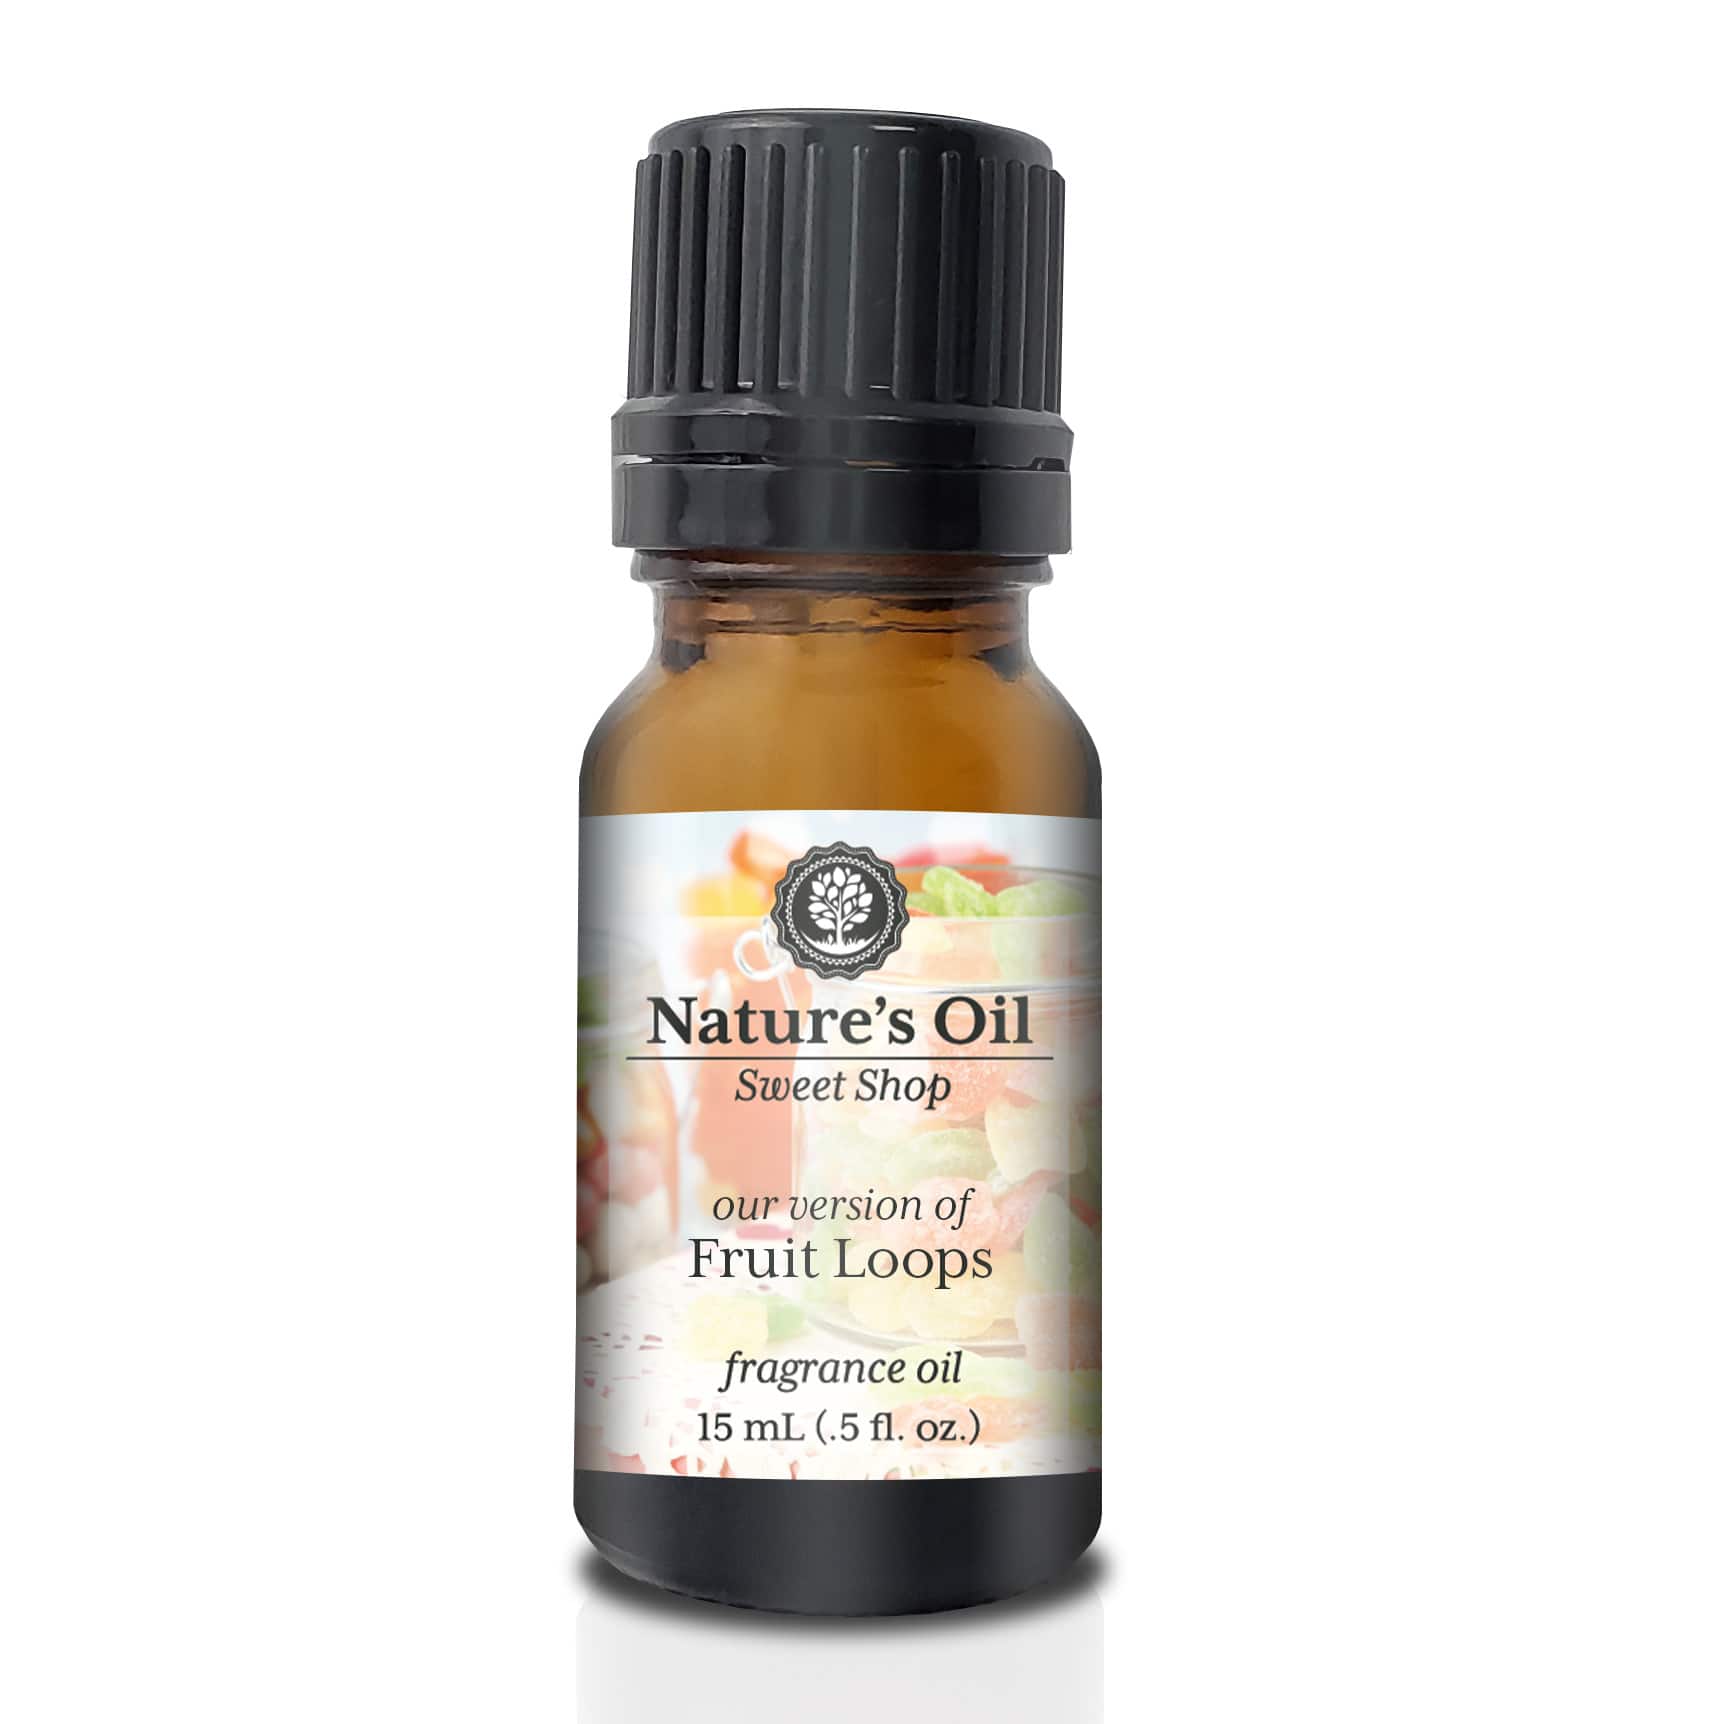 Nature's Oil Our Version of Fruit Loops Fragrance Oil